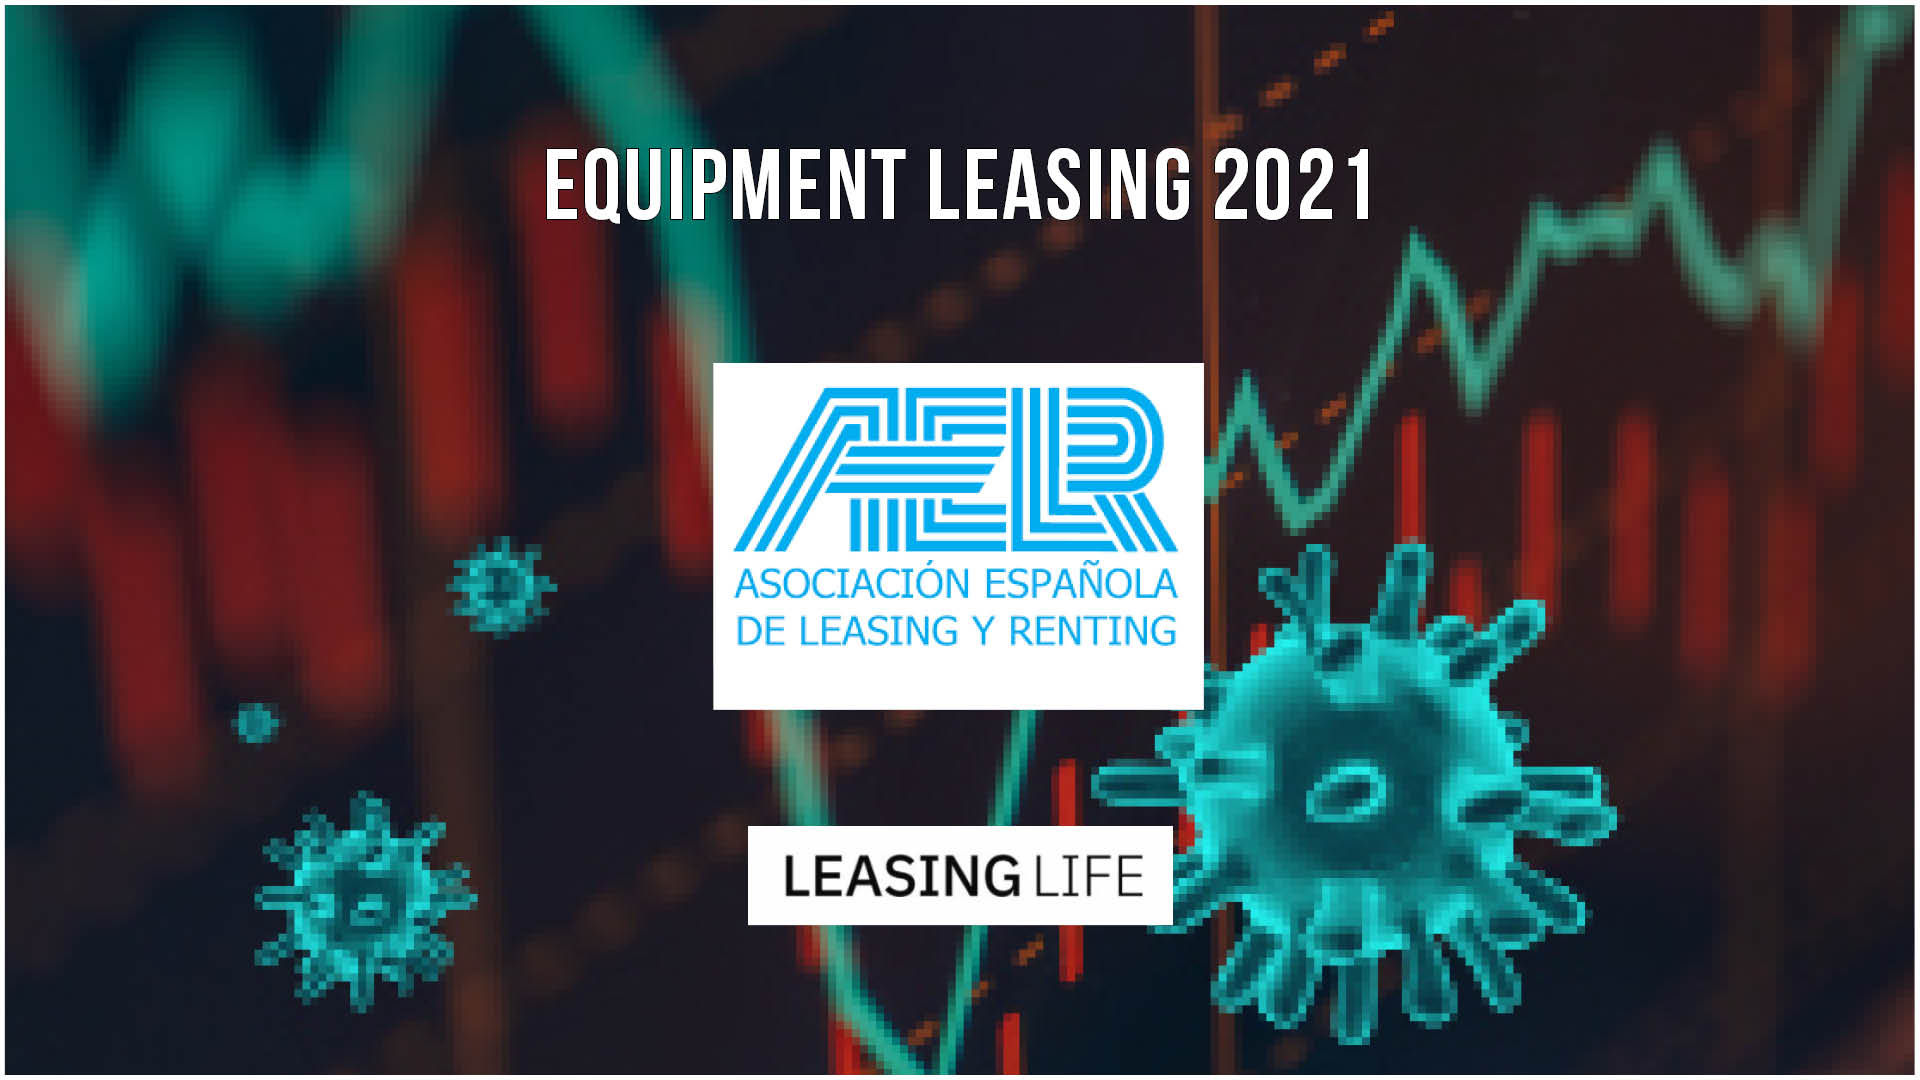 Spanish equipment leasing grew 36% in the first half of 2021: AELR